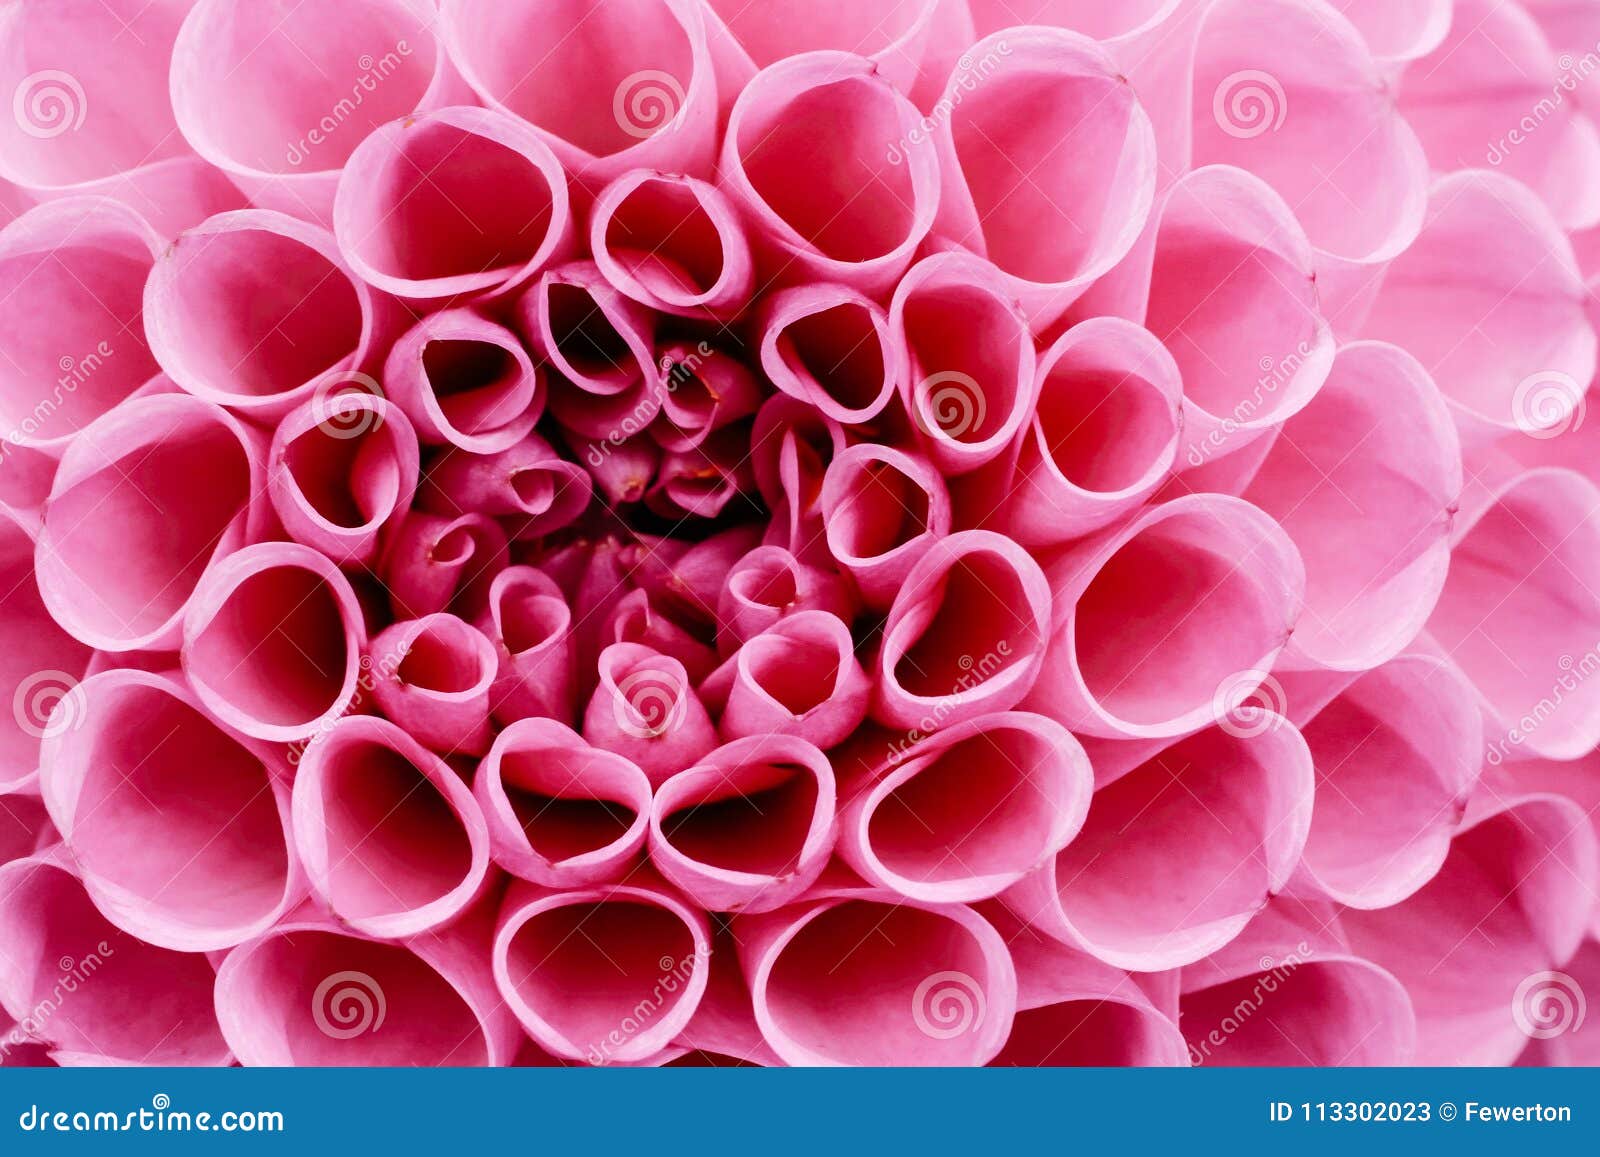 light pink and white dahlia flower macro photo. picture in color emphasizing the light pink colours